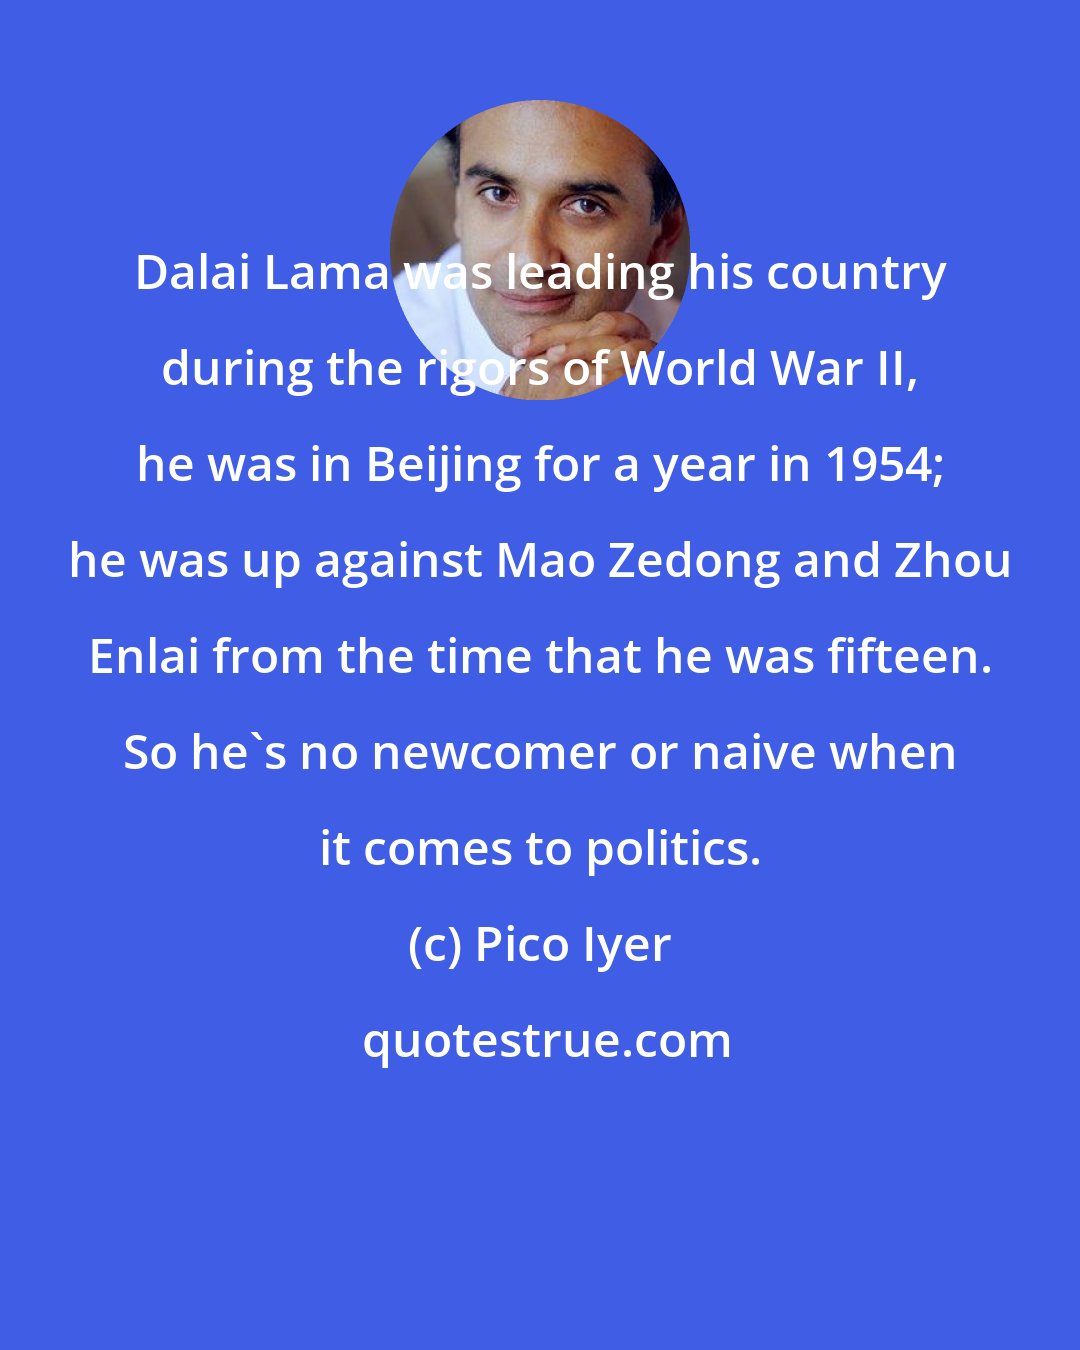 Pico Iyer: Dalai Lama was leading his country during the rigors of World War II, he was in Beijing for a year in 1954; he was up against Mao Zedong and Zhou Enlai from the time that he was fifteen. So he's no newcomer or naive when it comes to politics.